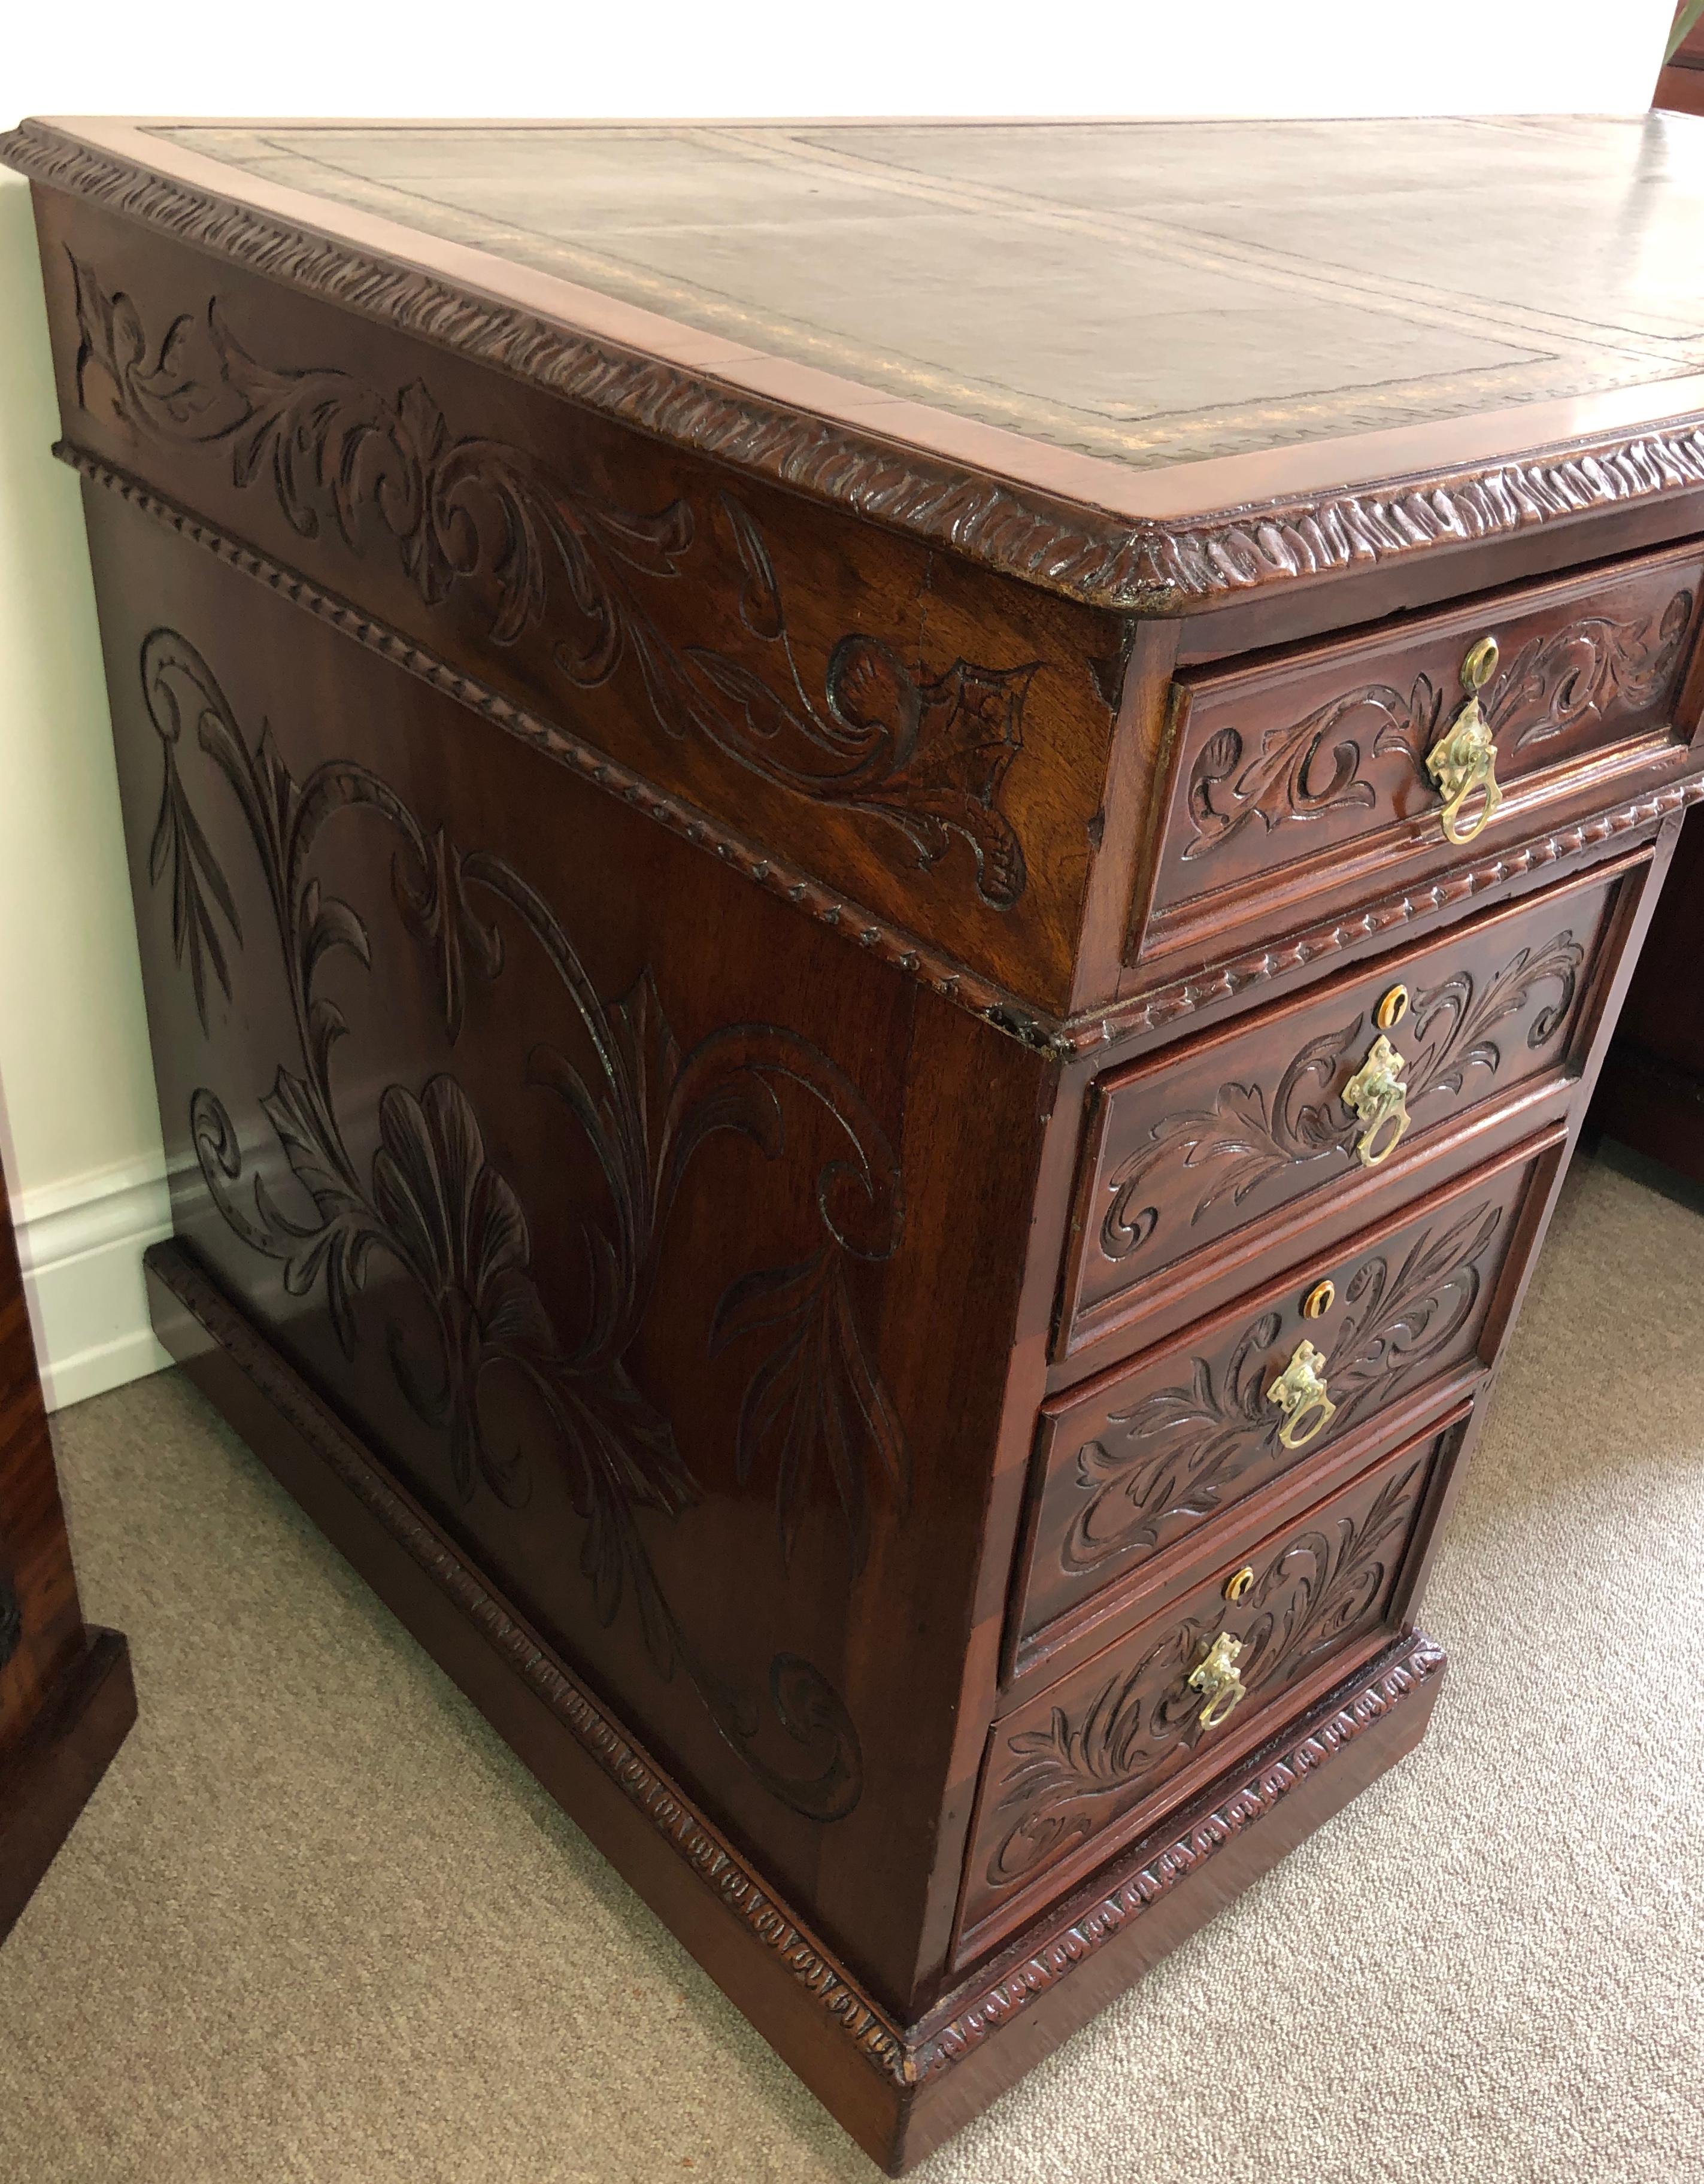 Handsome three part solid mahogany superior quality desk by S&H Jewell & Co. of little queen St London, with beautiful floral carvings throughout and a gilt tooled leather top.